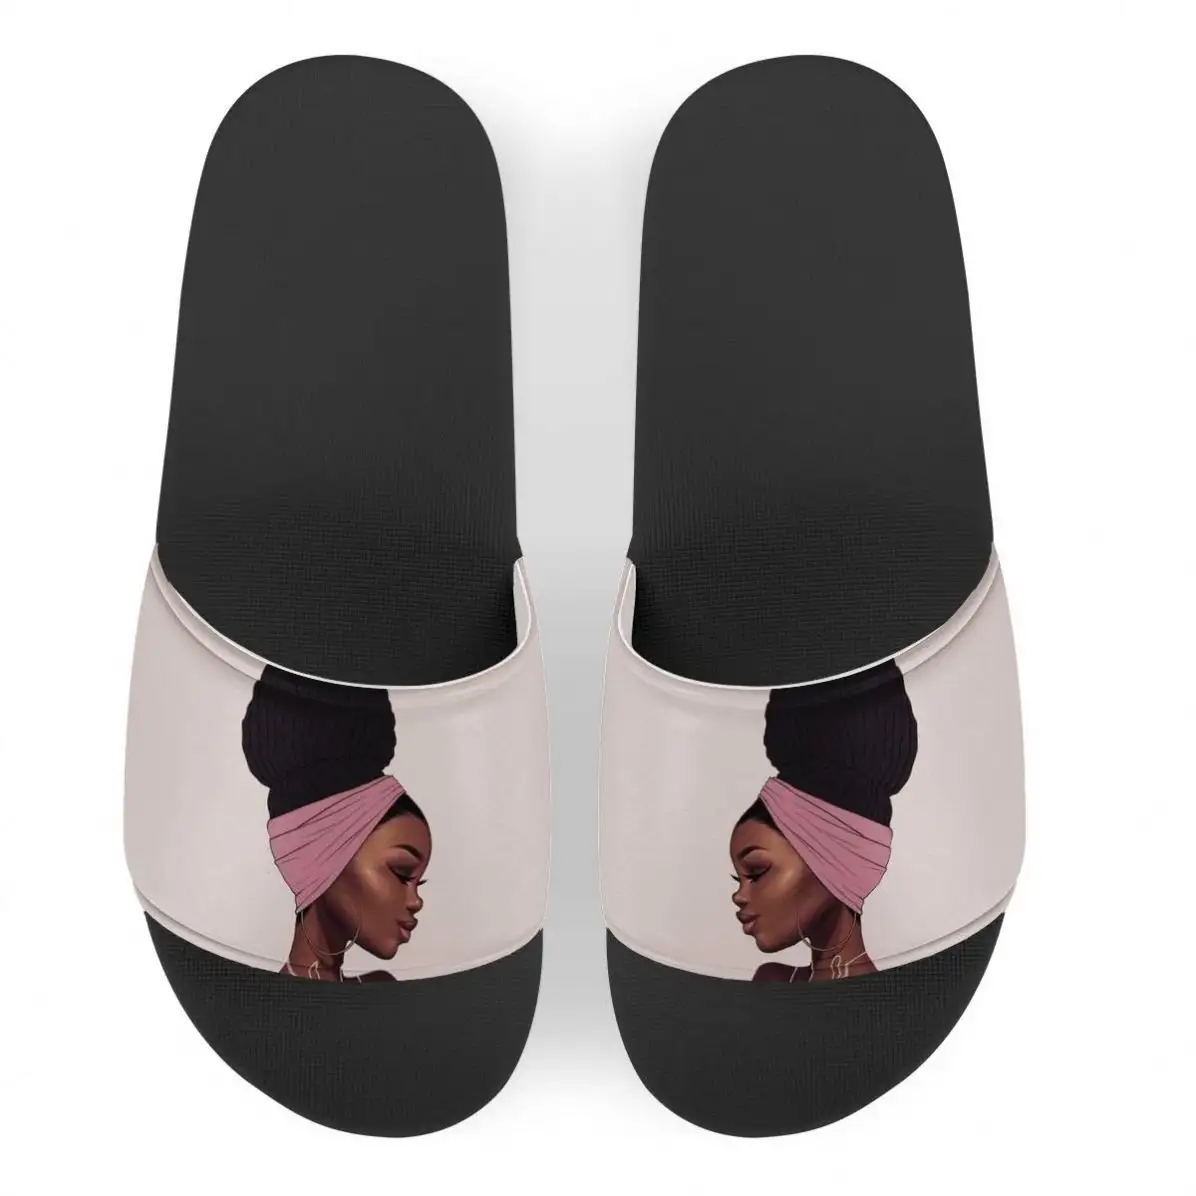 POD Beauty African Girls Pattern Convenient Big Size Indoor Slippers For Ladies Pool Slide Sandals Platform Shoes Slippers